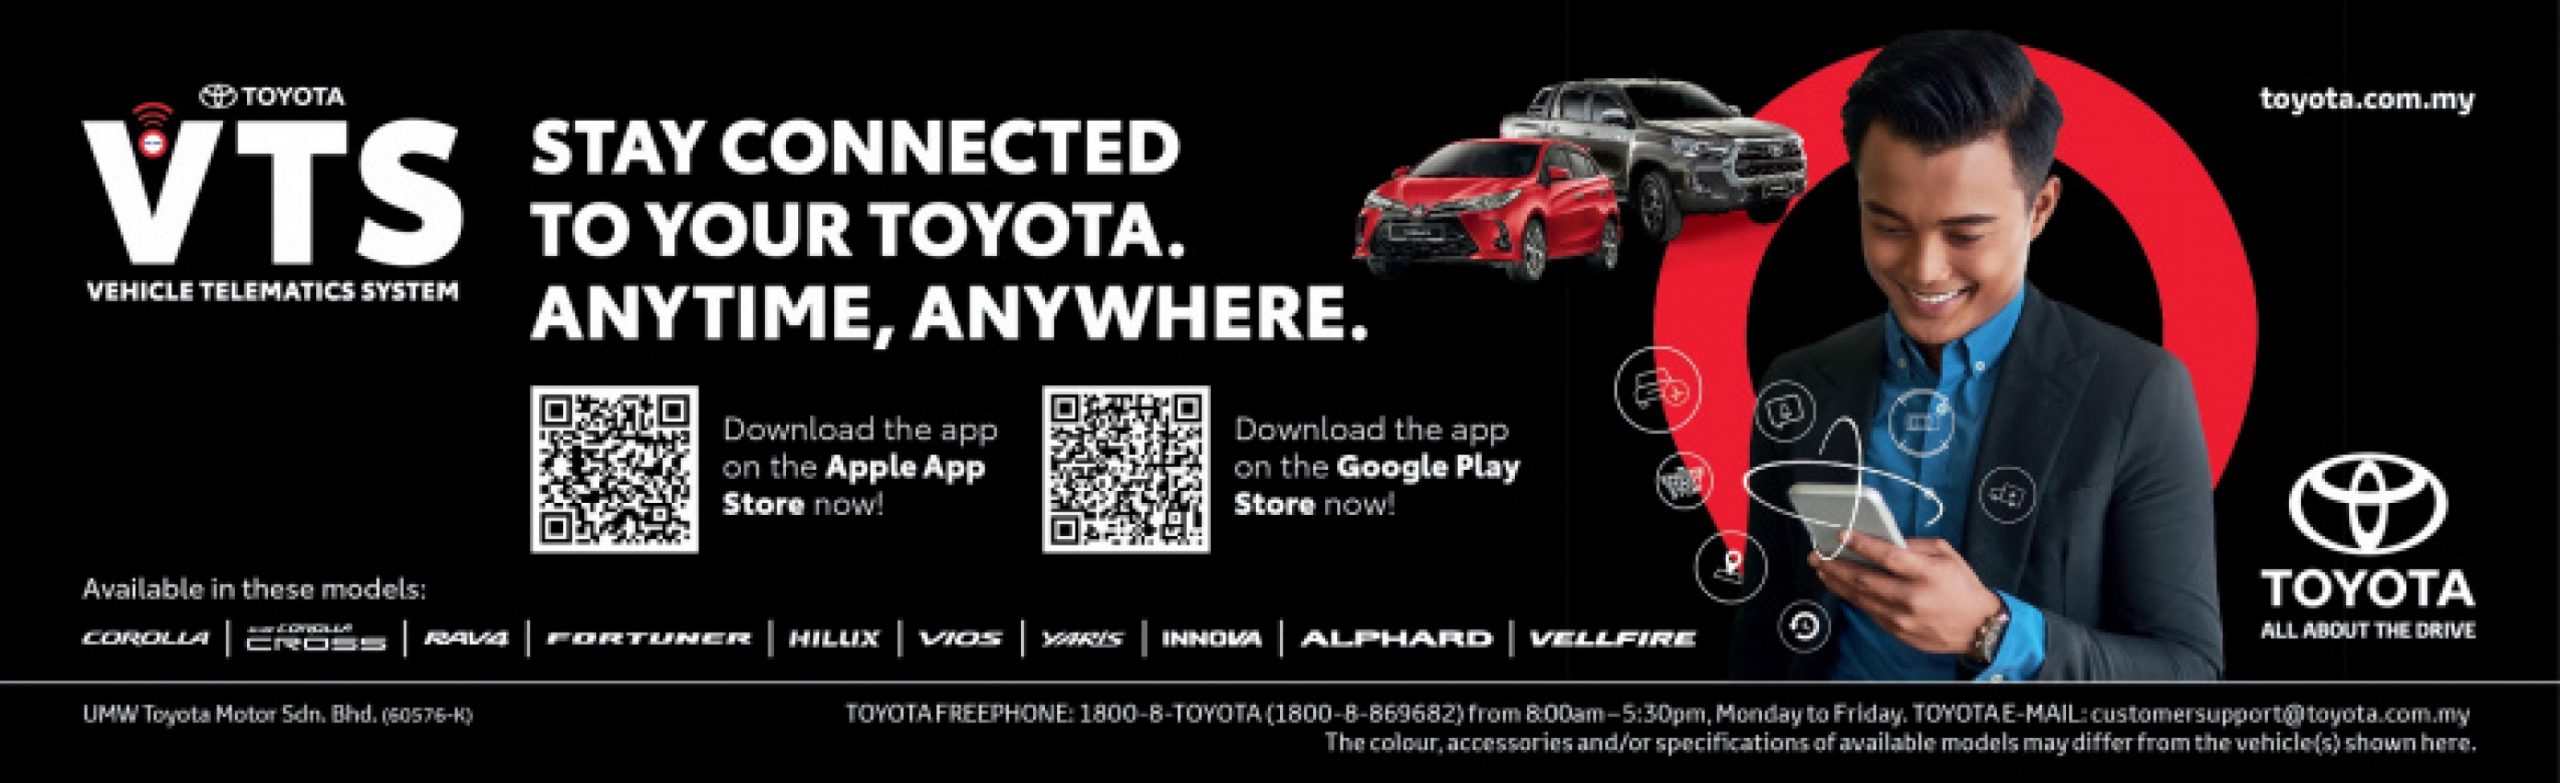 autos, car brands, cars, toyota, aftersales, malaysia, roadside assistance, umw toyota motor, toyota encourages customers to make use of road assist app and telematics system for convenience and safety